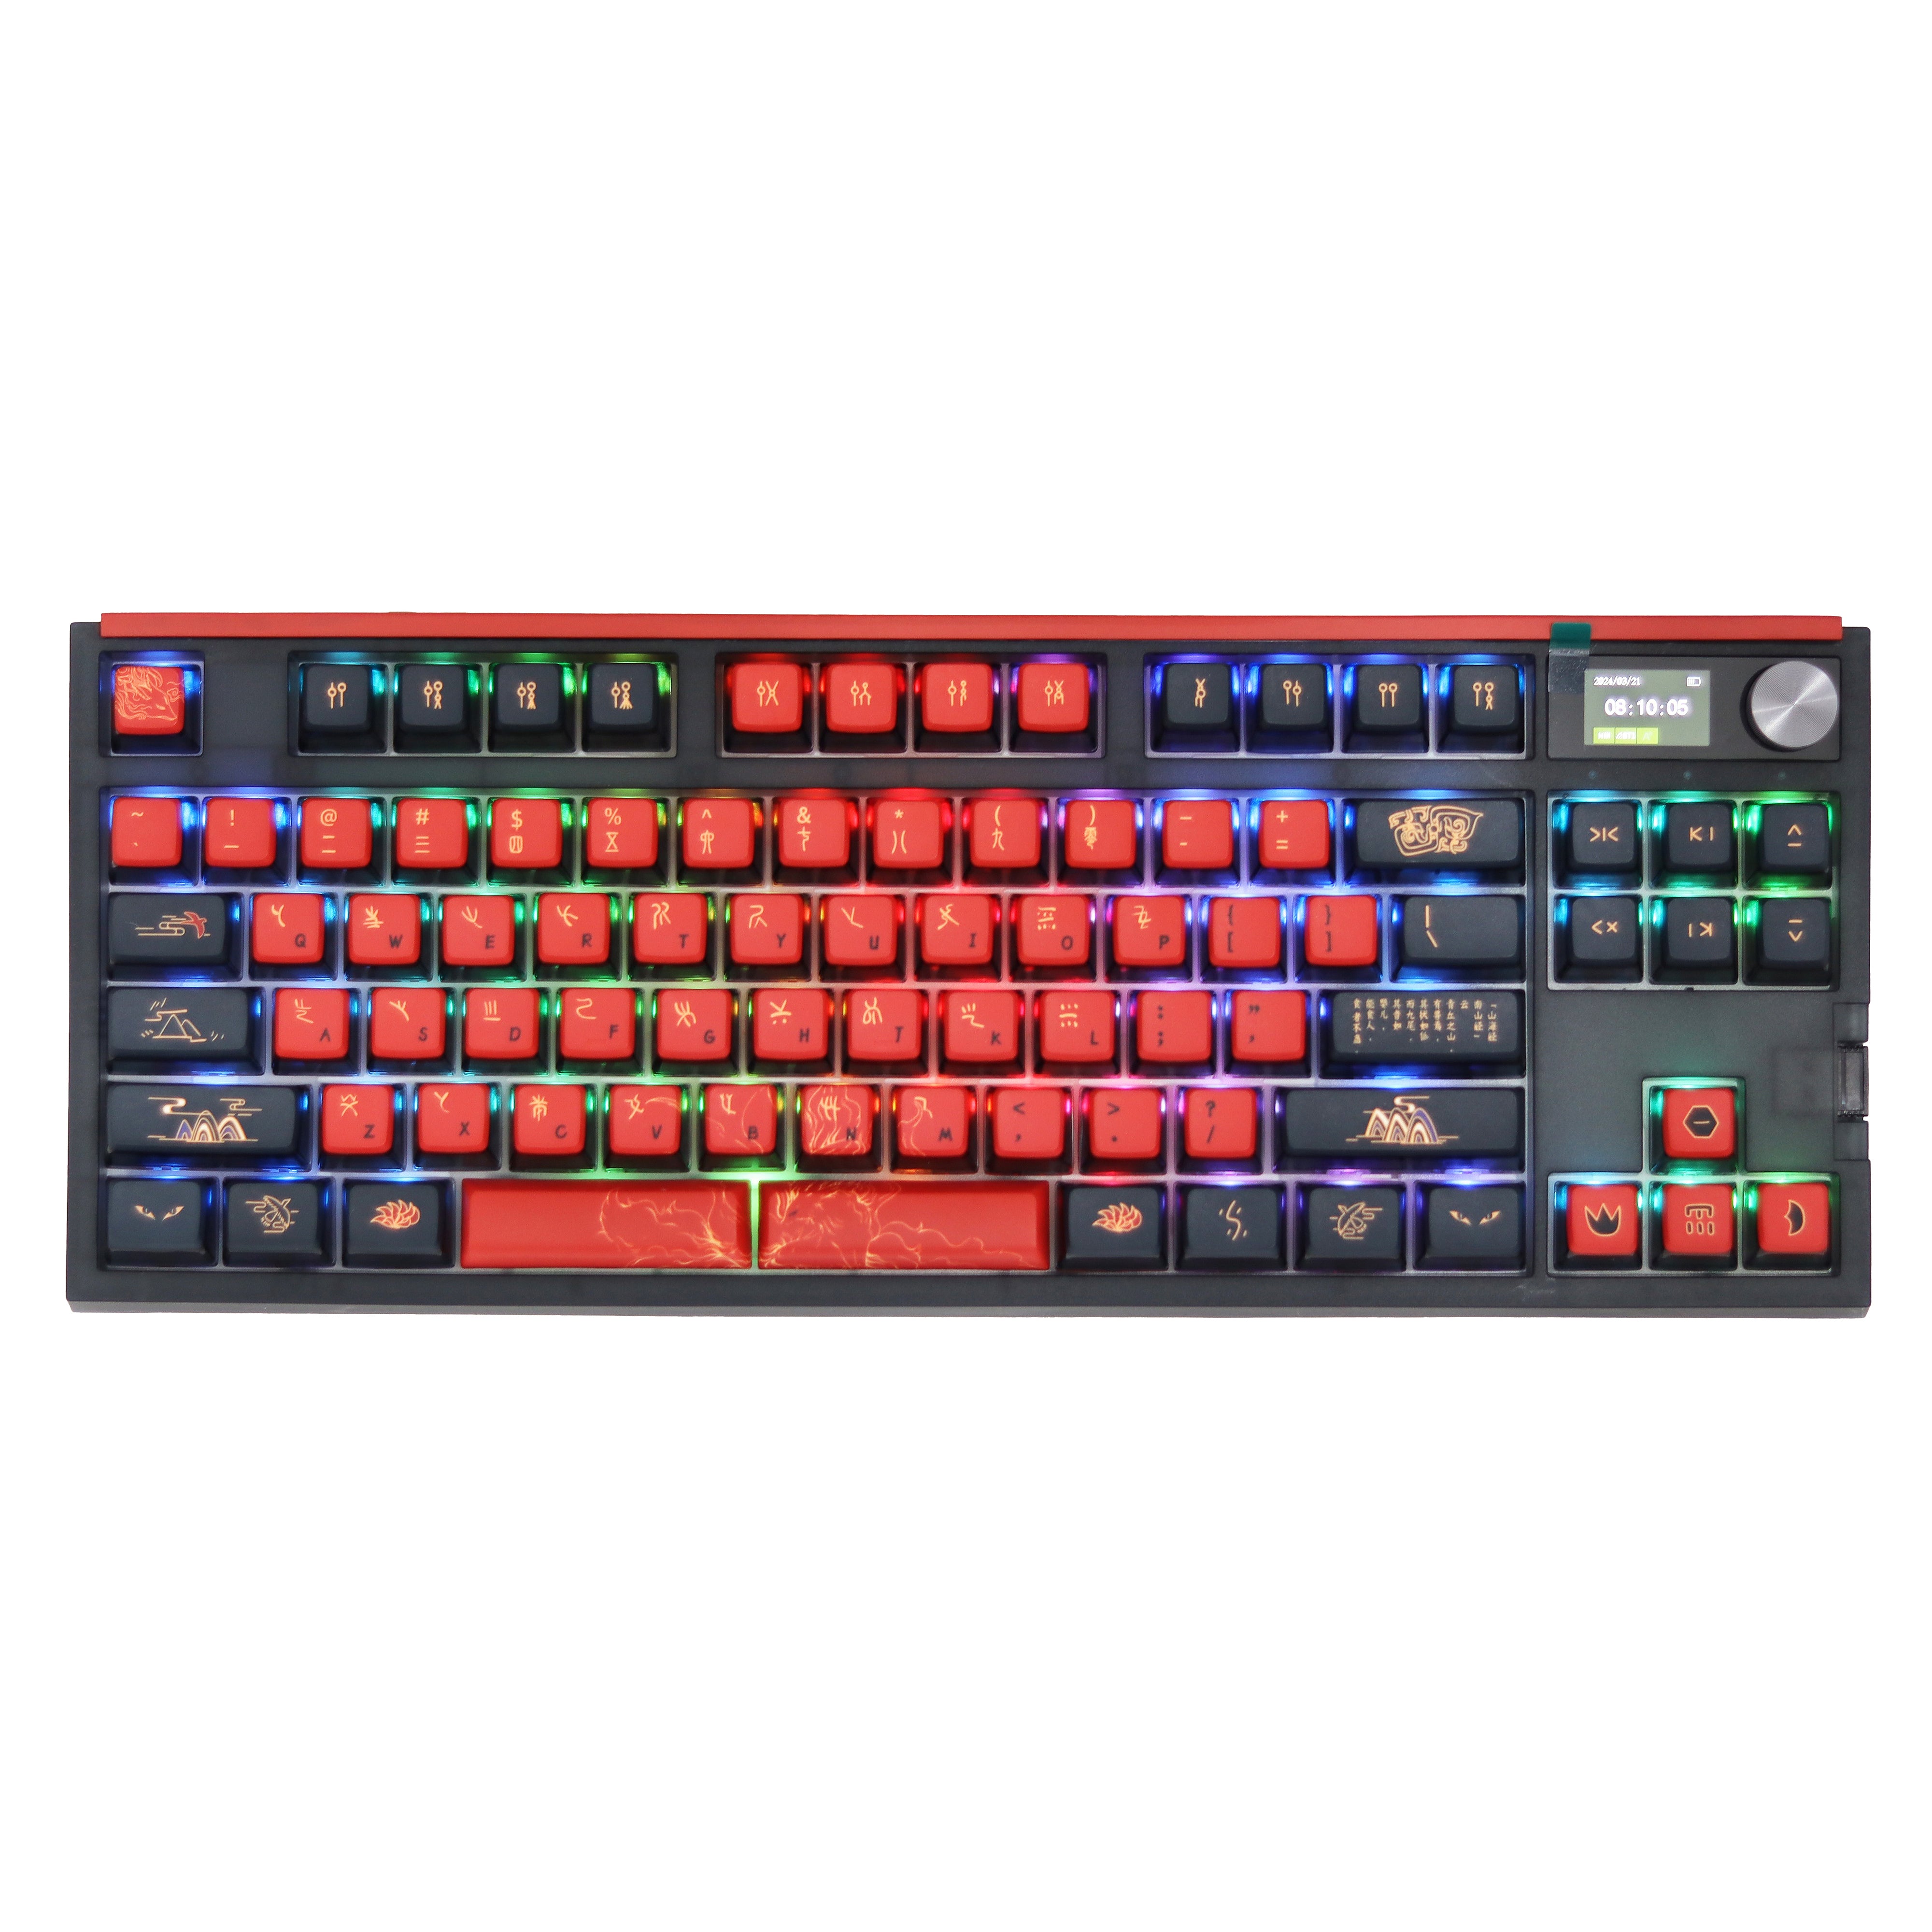 Glacier Skyloong GK87 Pro Youth Wireless/Wired Mechanical Keyboard-Nine Tailed Fox-